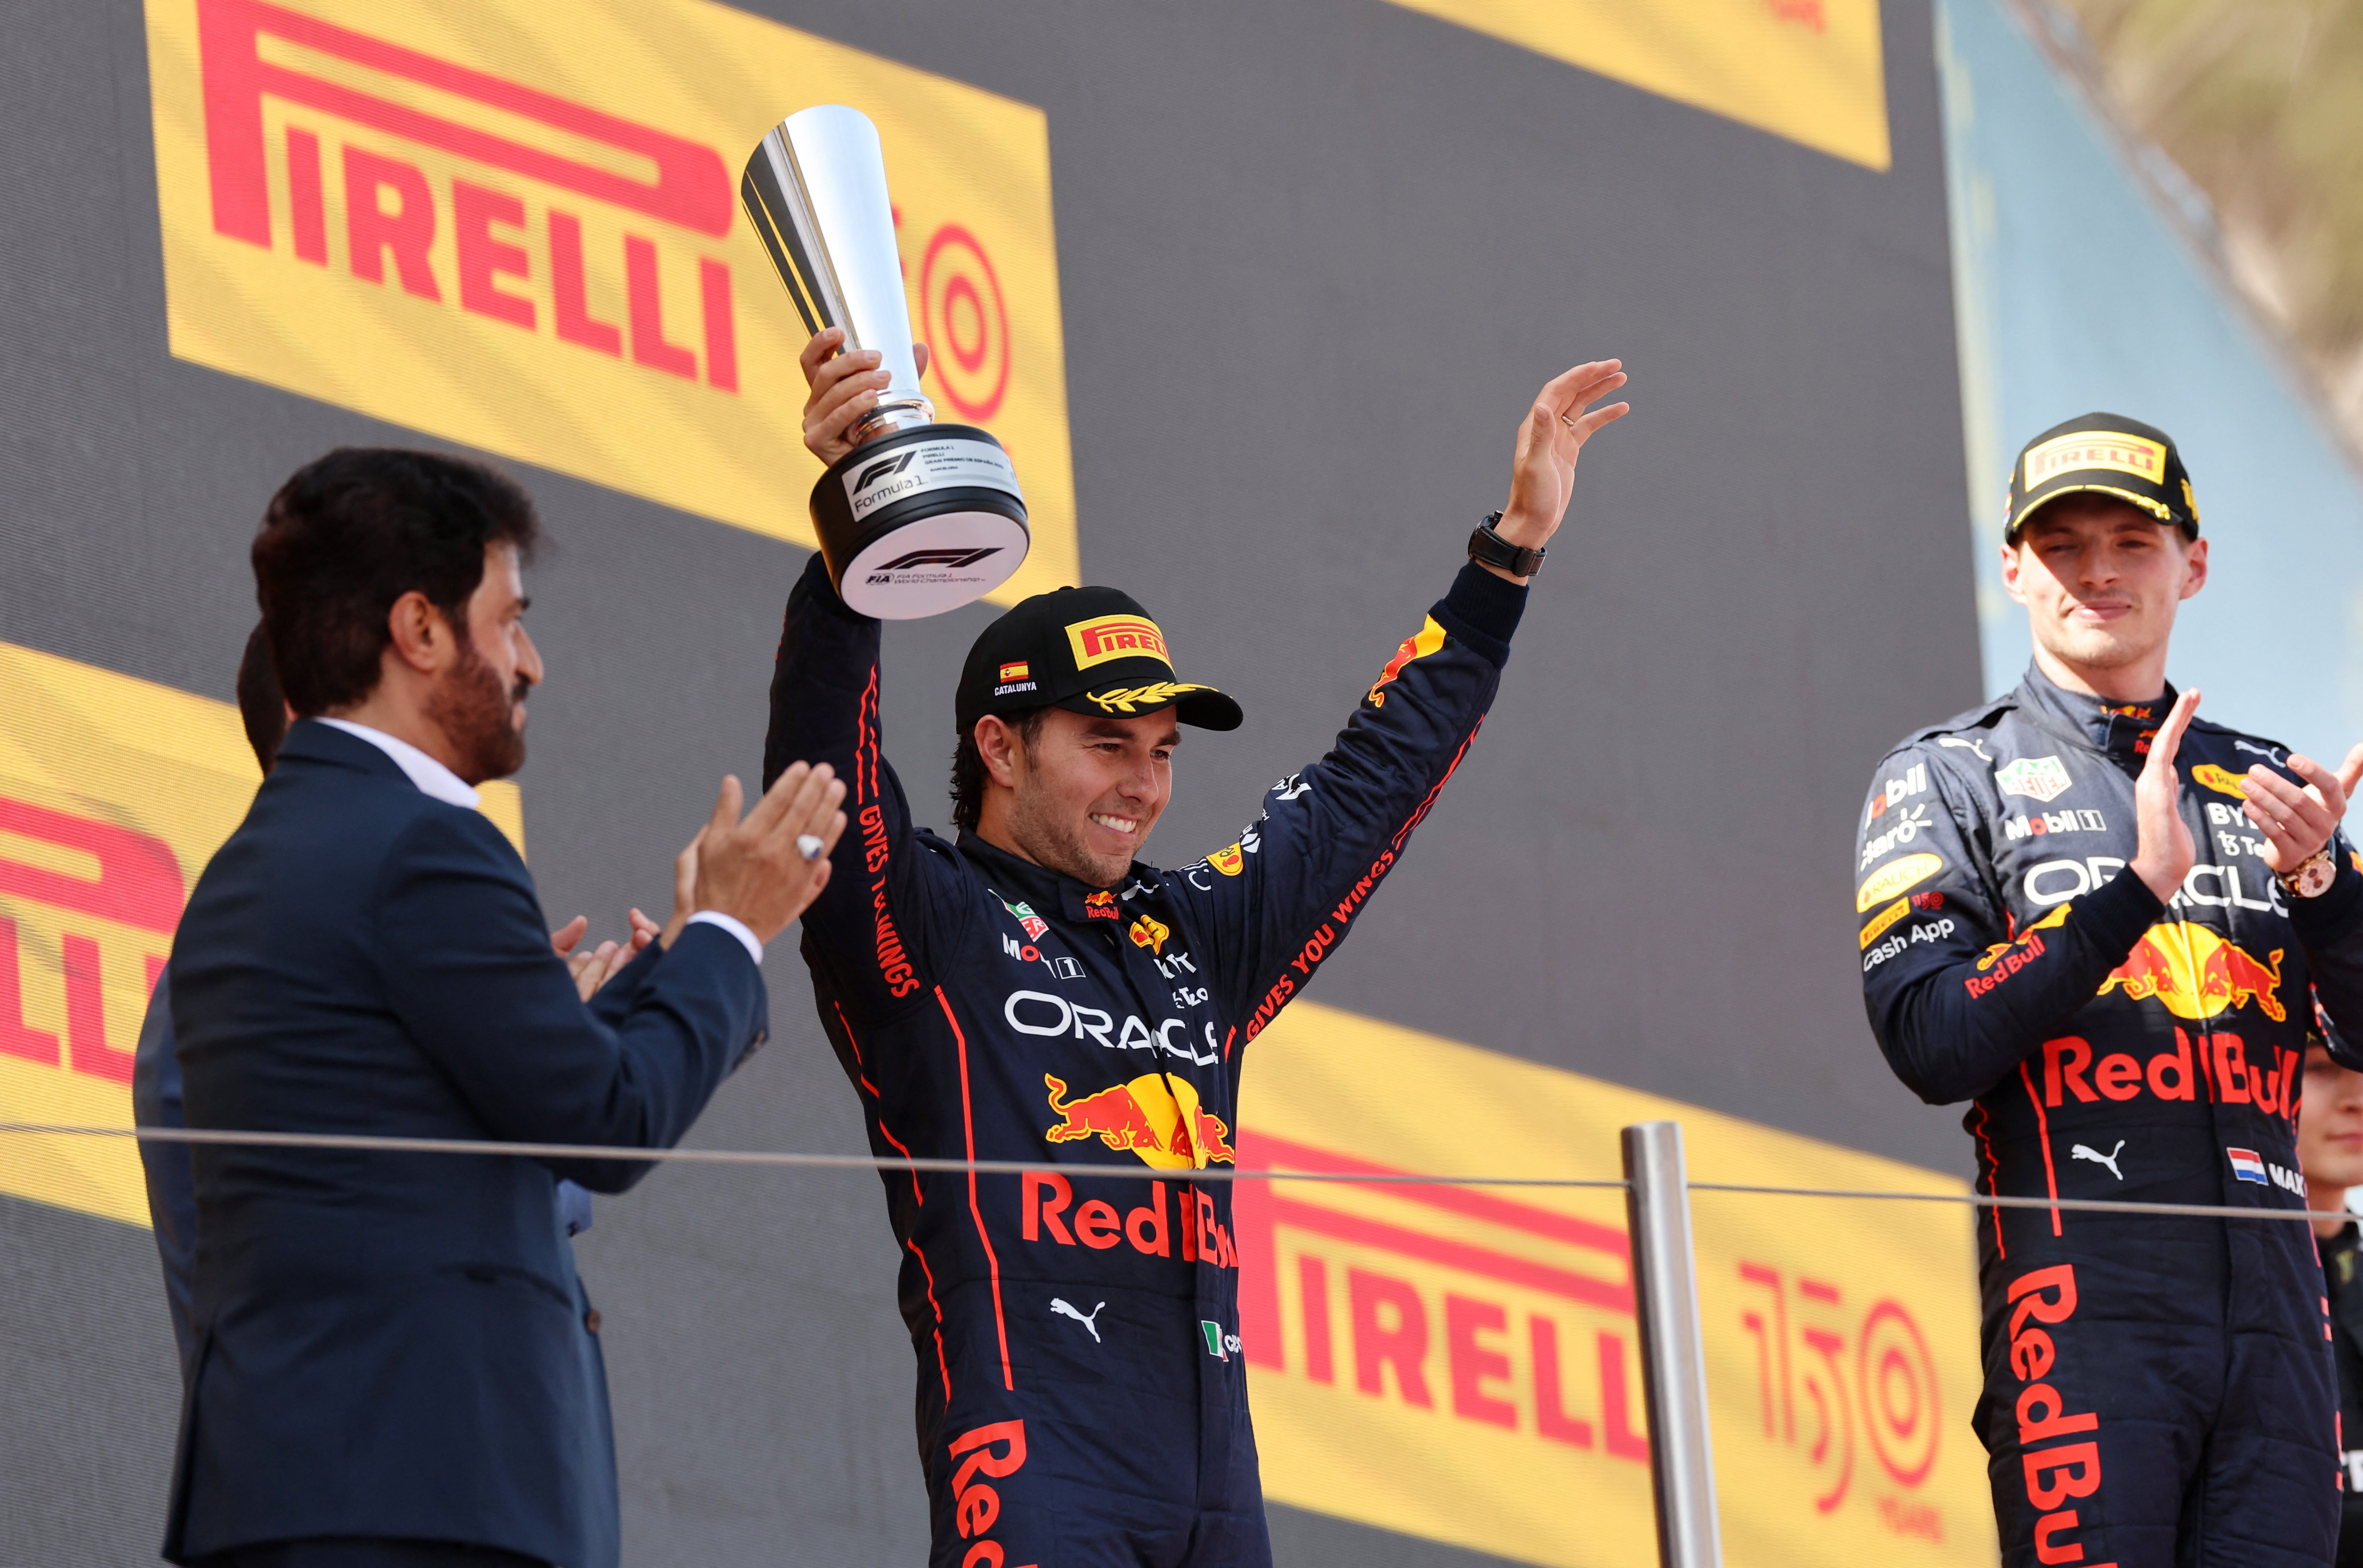 Formula One F1 - Spanish Grand Prix - Circuit de Barcelona-Catalunya, Barcelona, Spain - May 22, 2022 Second placed Sergio Perez of Red Bull celebrates on the podium alongside first placed Max Verstappen of Red Bull after the race REUTERS/Nacho Doce